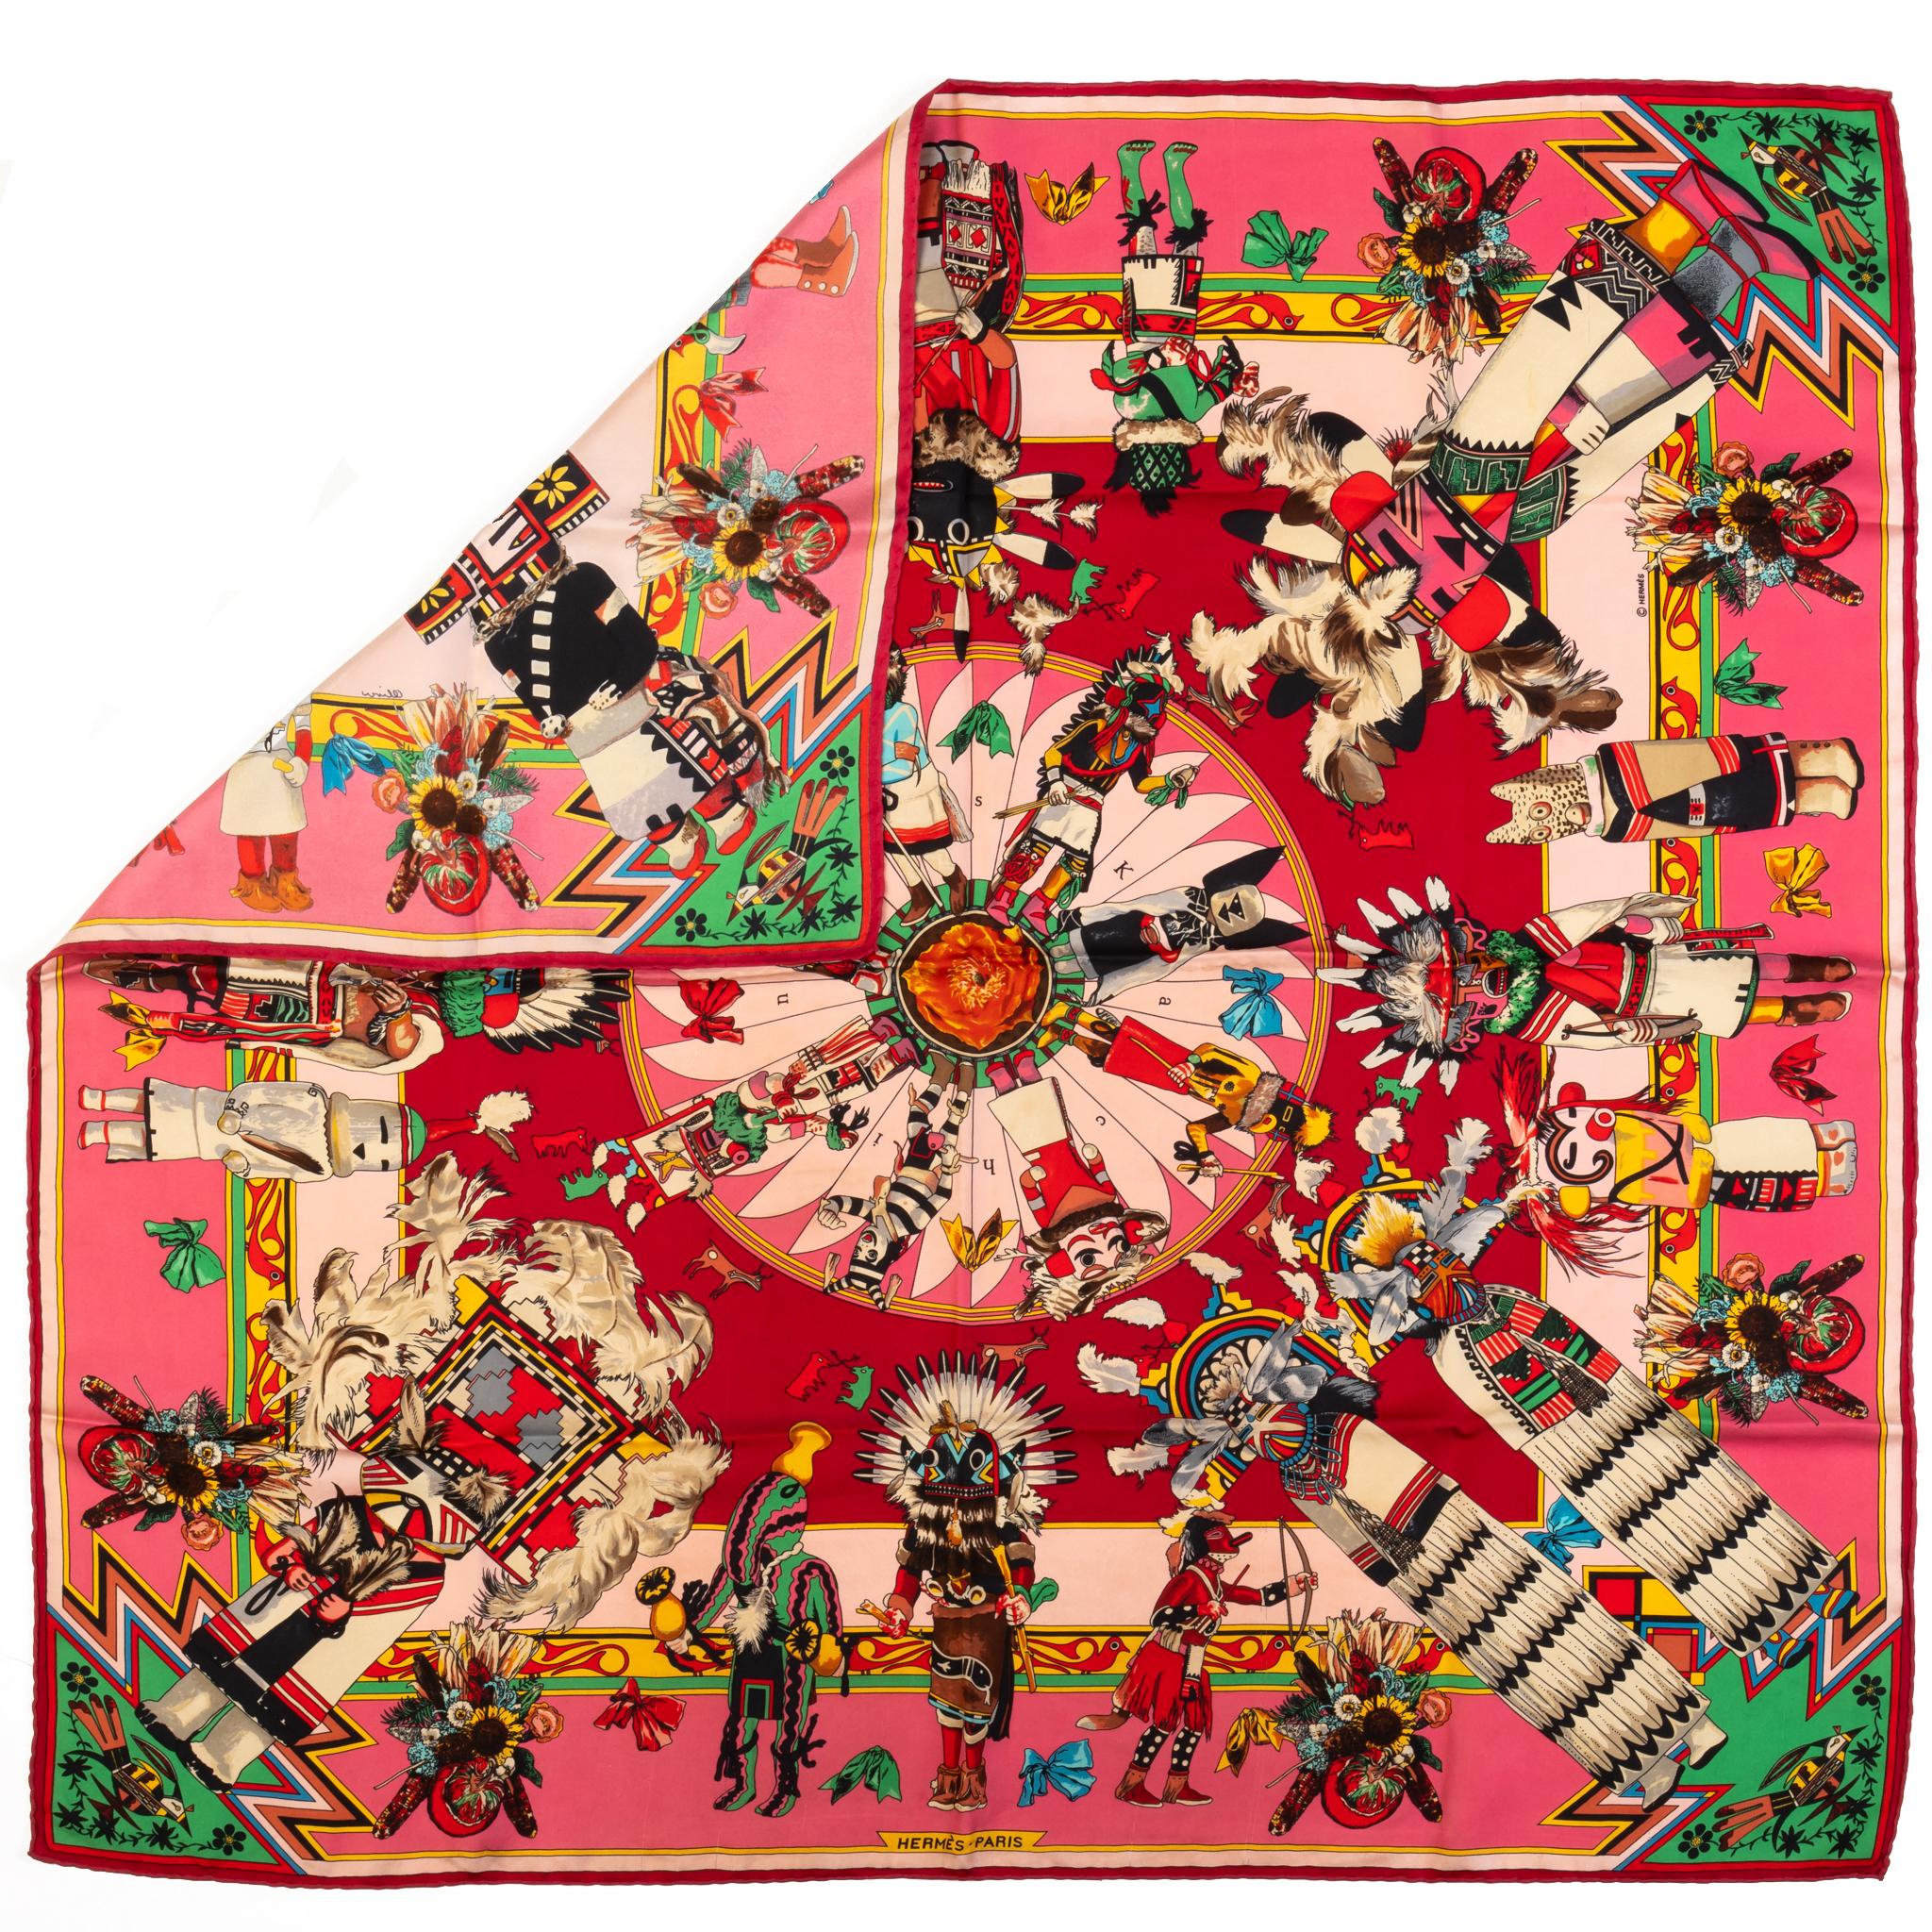 Hermès collectible pink Kachinas silk scarf by Kermit Oliver. A little spot, thread pulled. No box, no label.